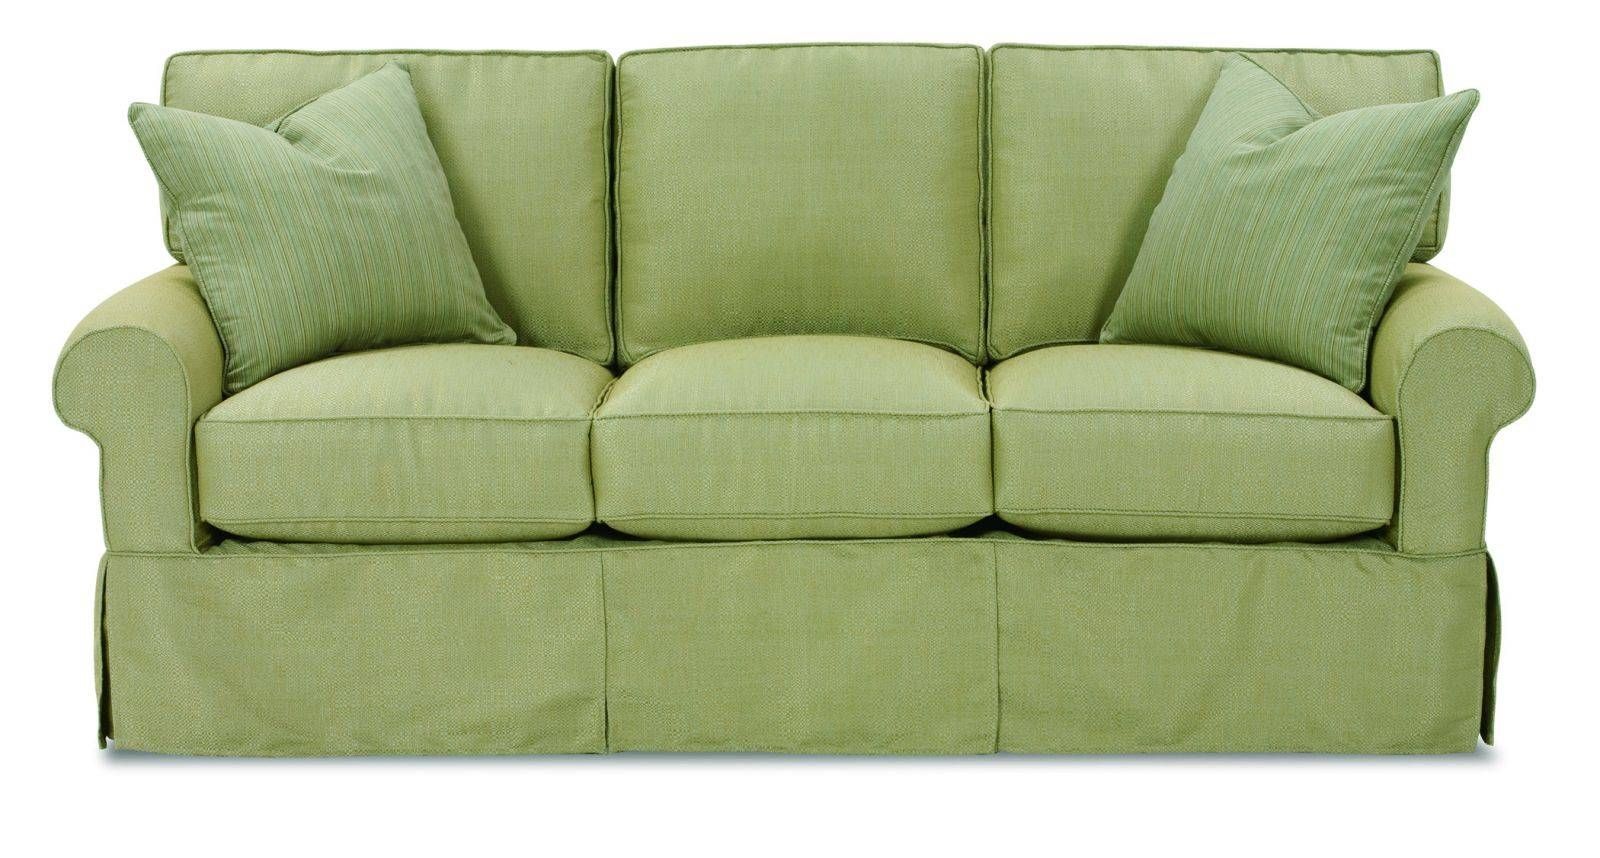 Sofa : What You Can Getusing Slipcover Sofas In Style (View 4 of 30)